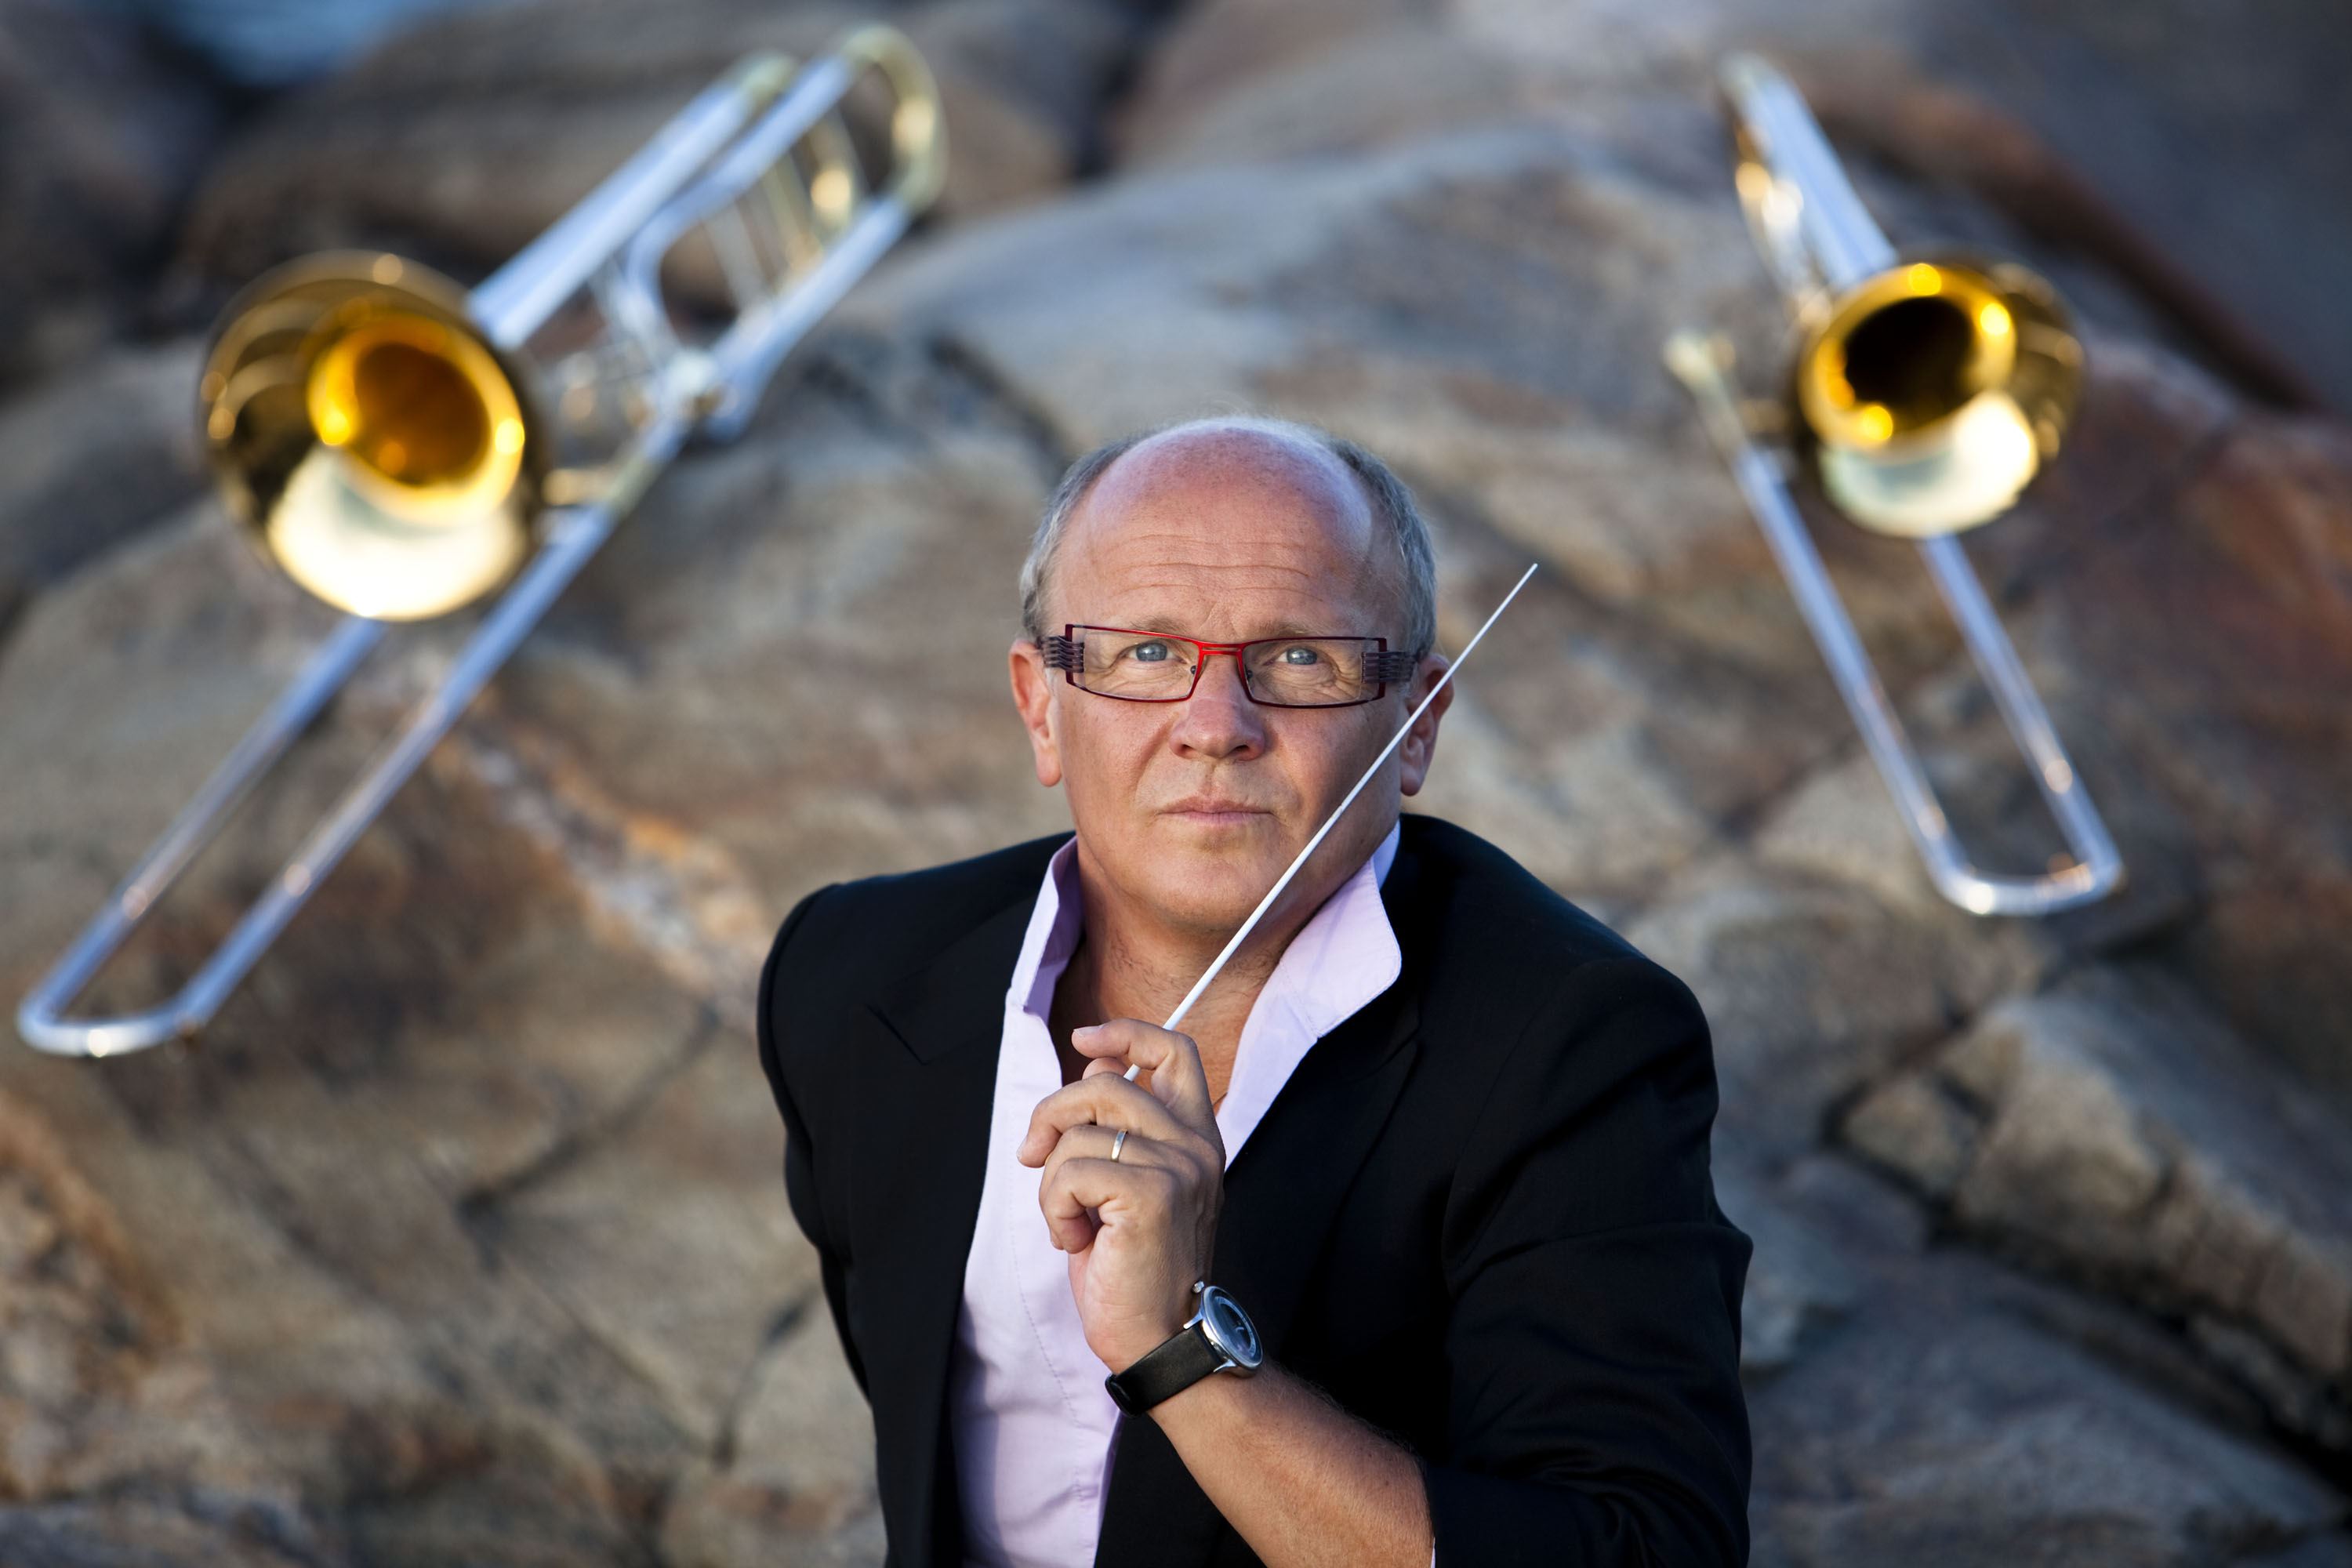 Christian Lindberg, trombone player, composer, and conductor